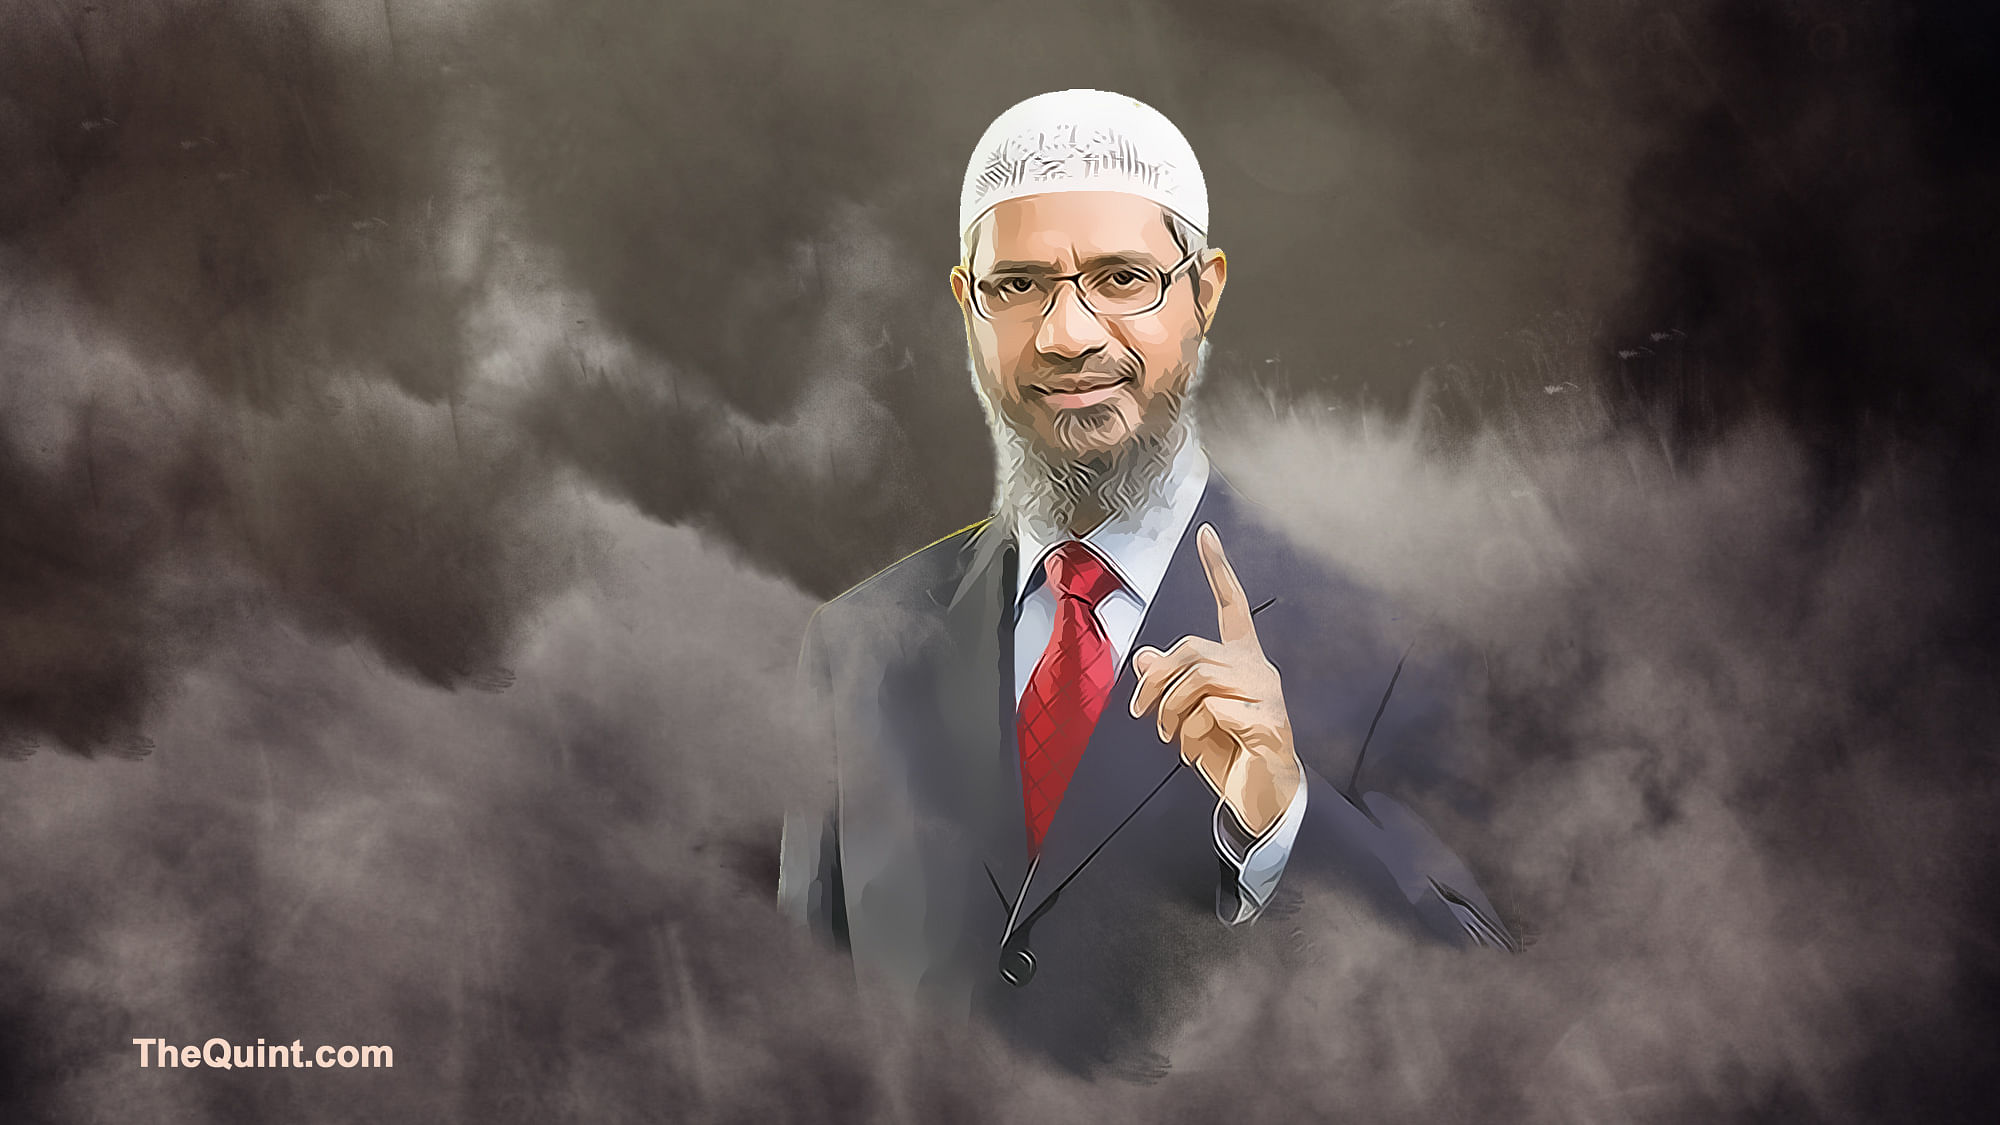 Zakir Naik’s ideology was called divisive, and against India’s pluralistic, secular and social fabric by the Solicitor General.&nbsp;(Photo: Hardeep Singh/<b>The Quint</b>)